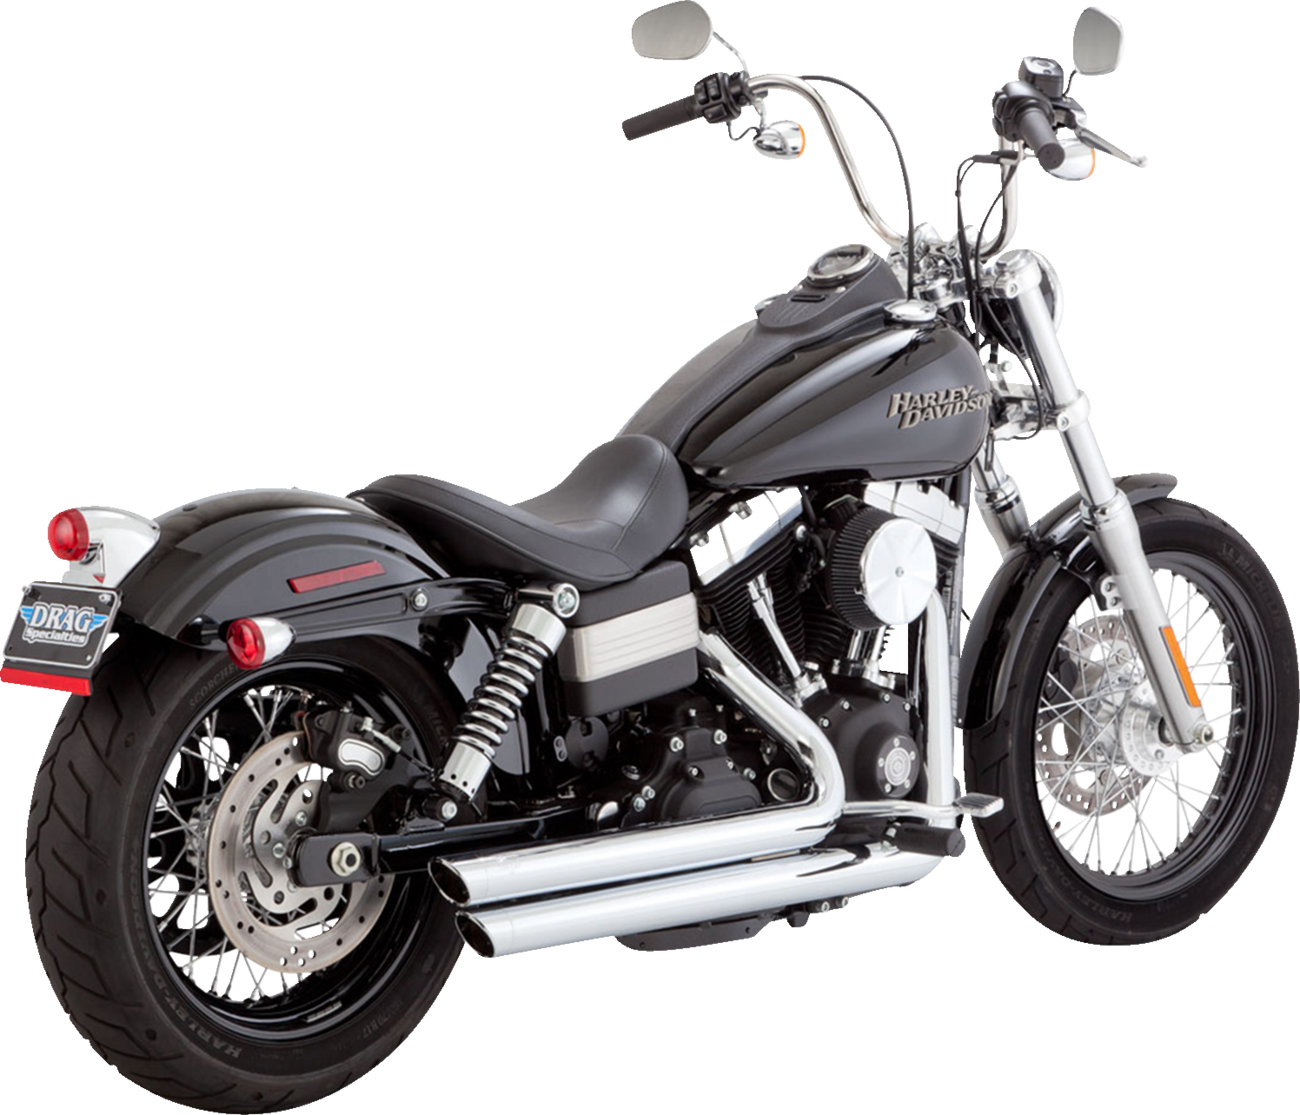 VANCE & HINES Big Shots Staggered Exhaust System - Chrome 17338